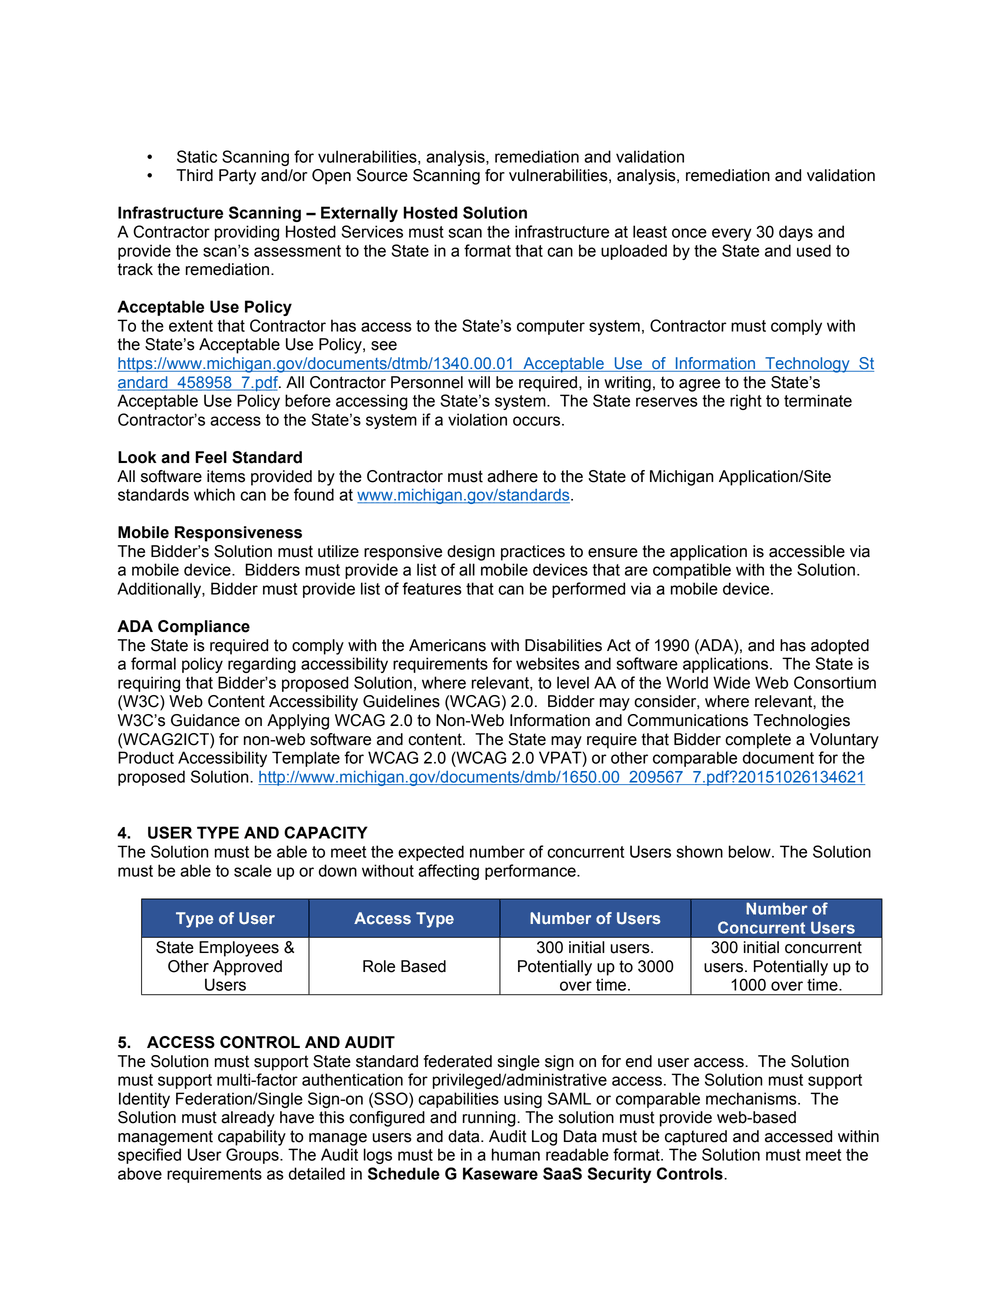 Page 40 from State of Michigan 2020 Kaseware contract